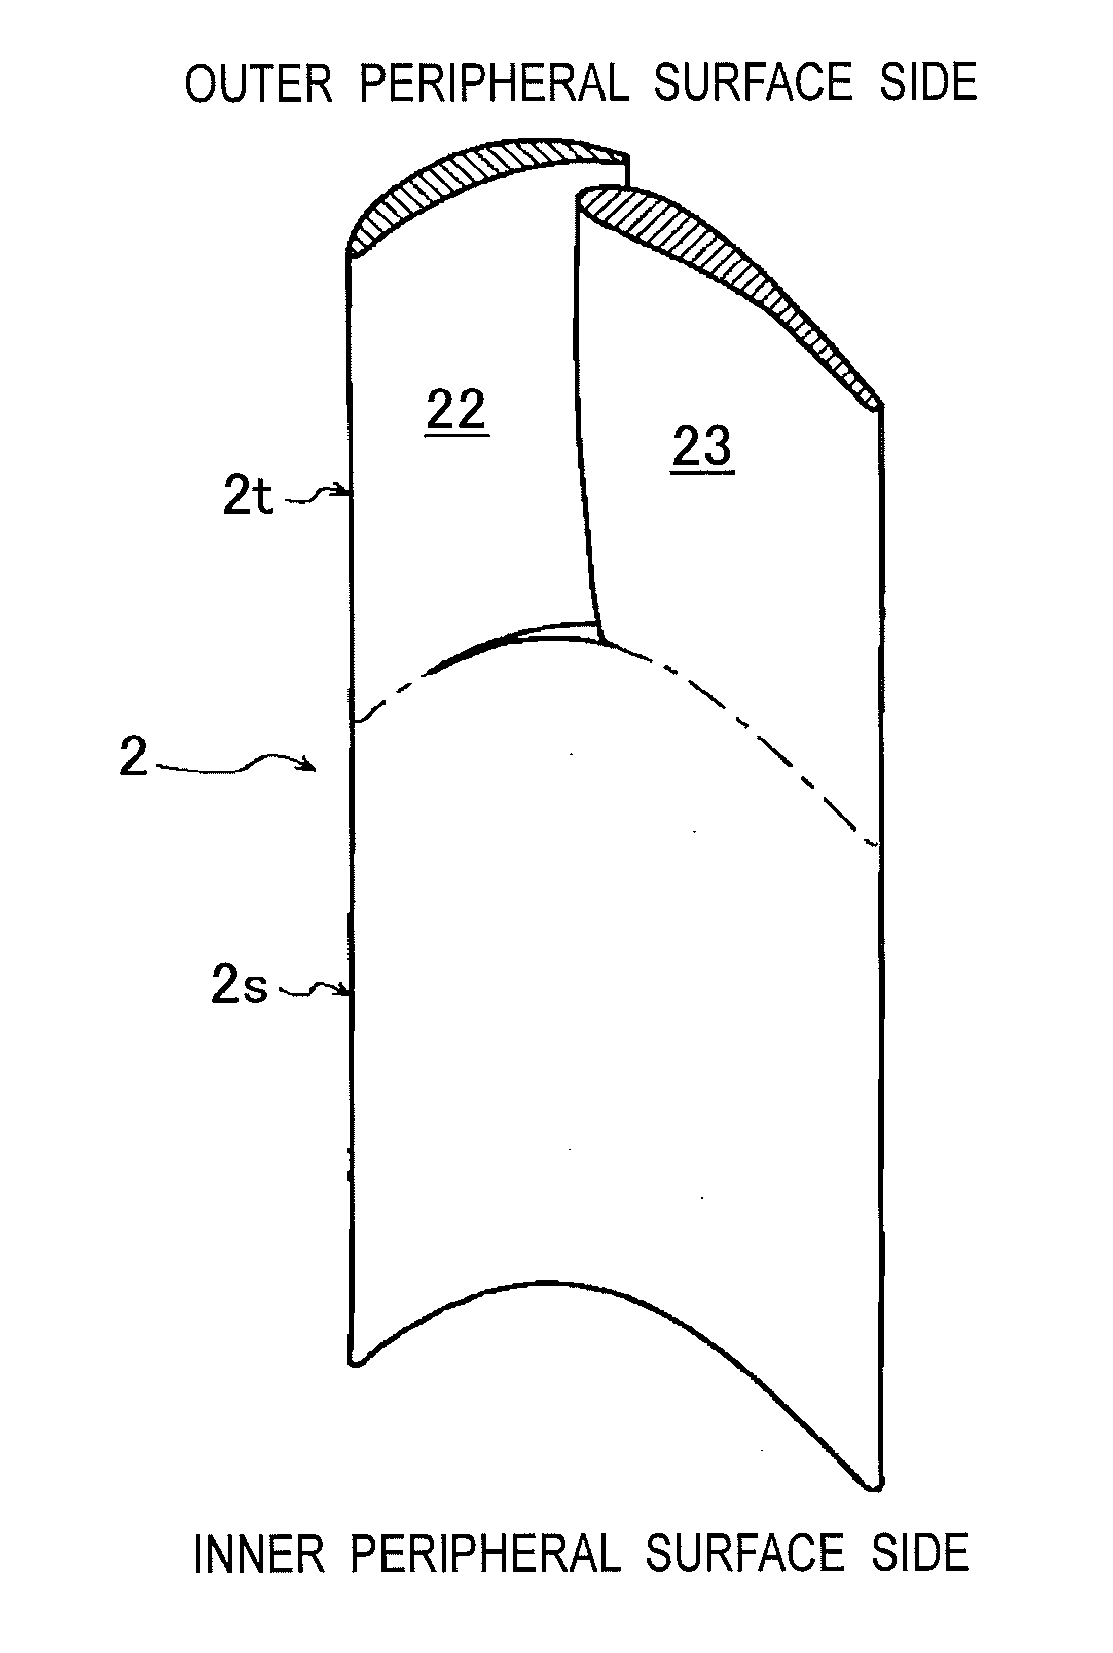 Vane structure for axial flow turbomachine and gas turbine engine